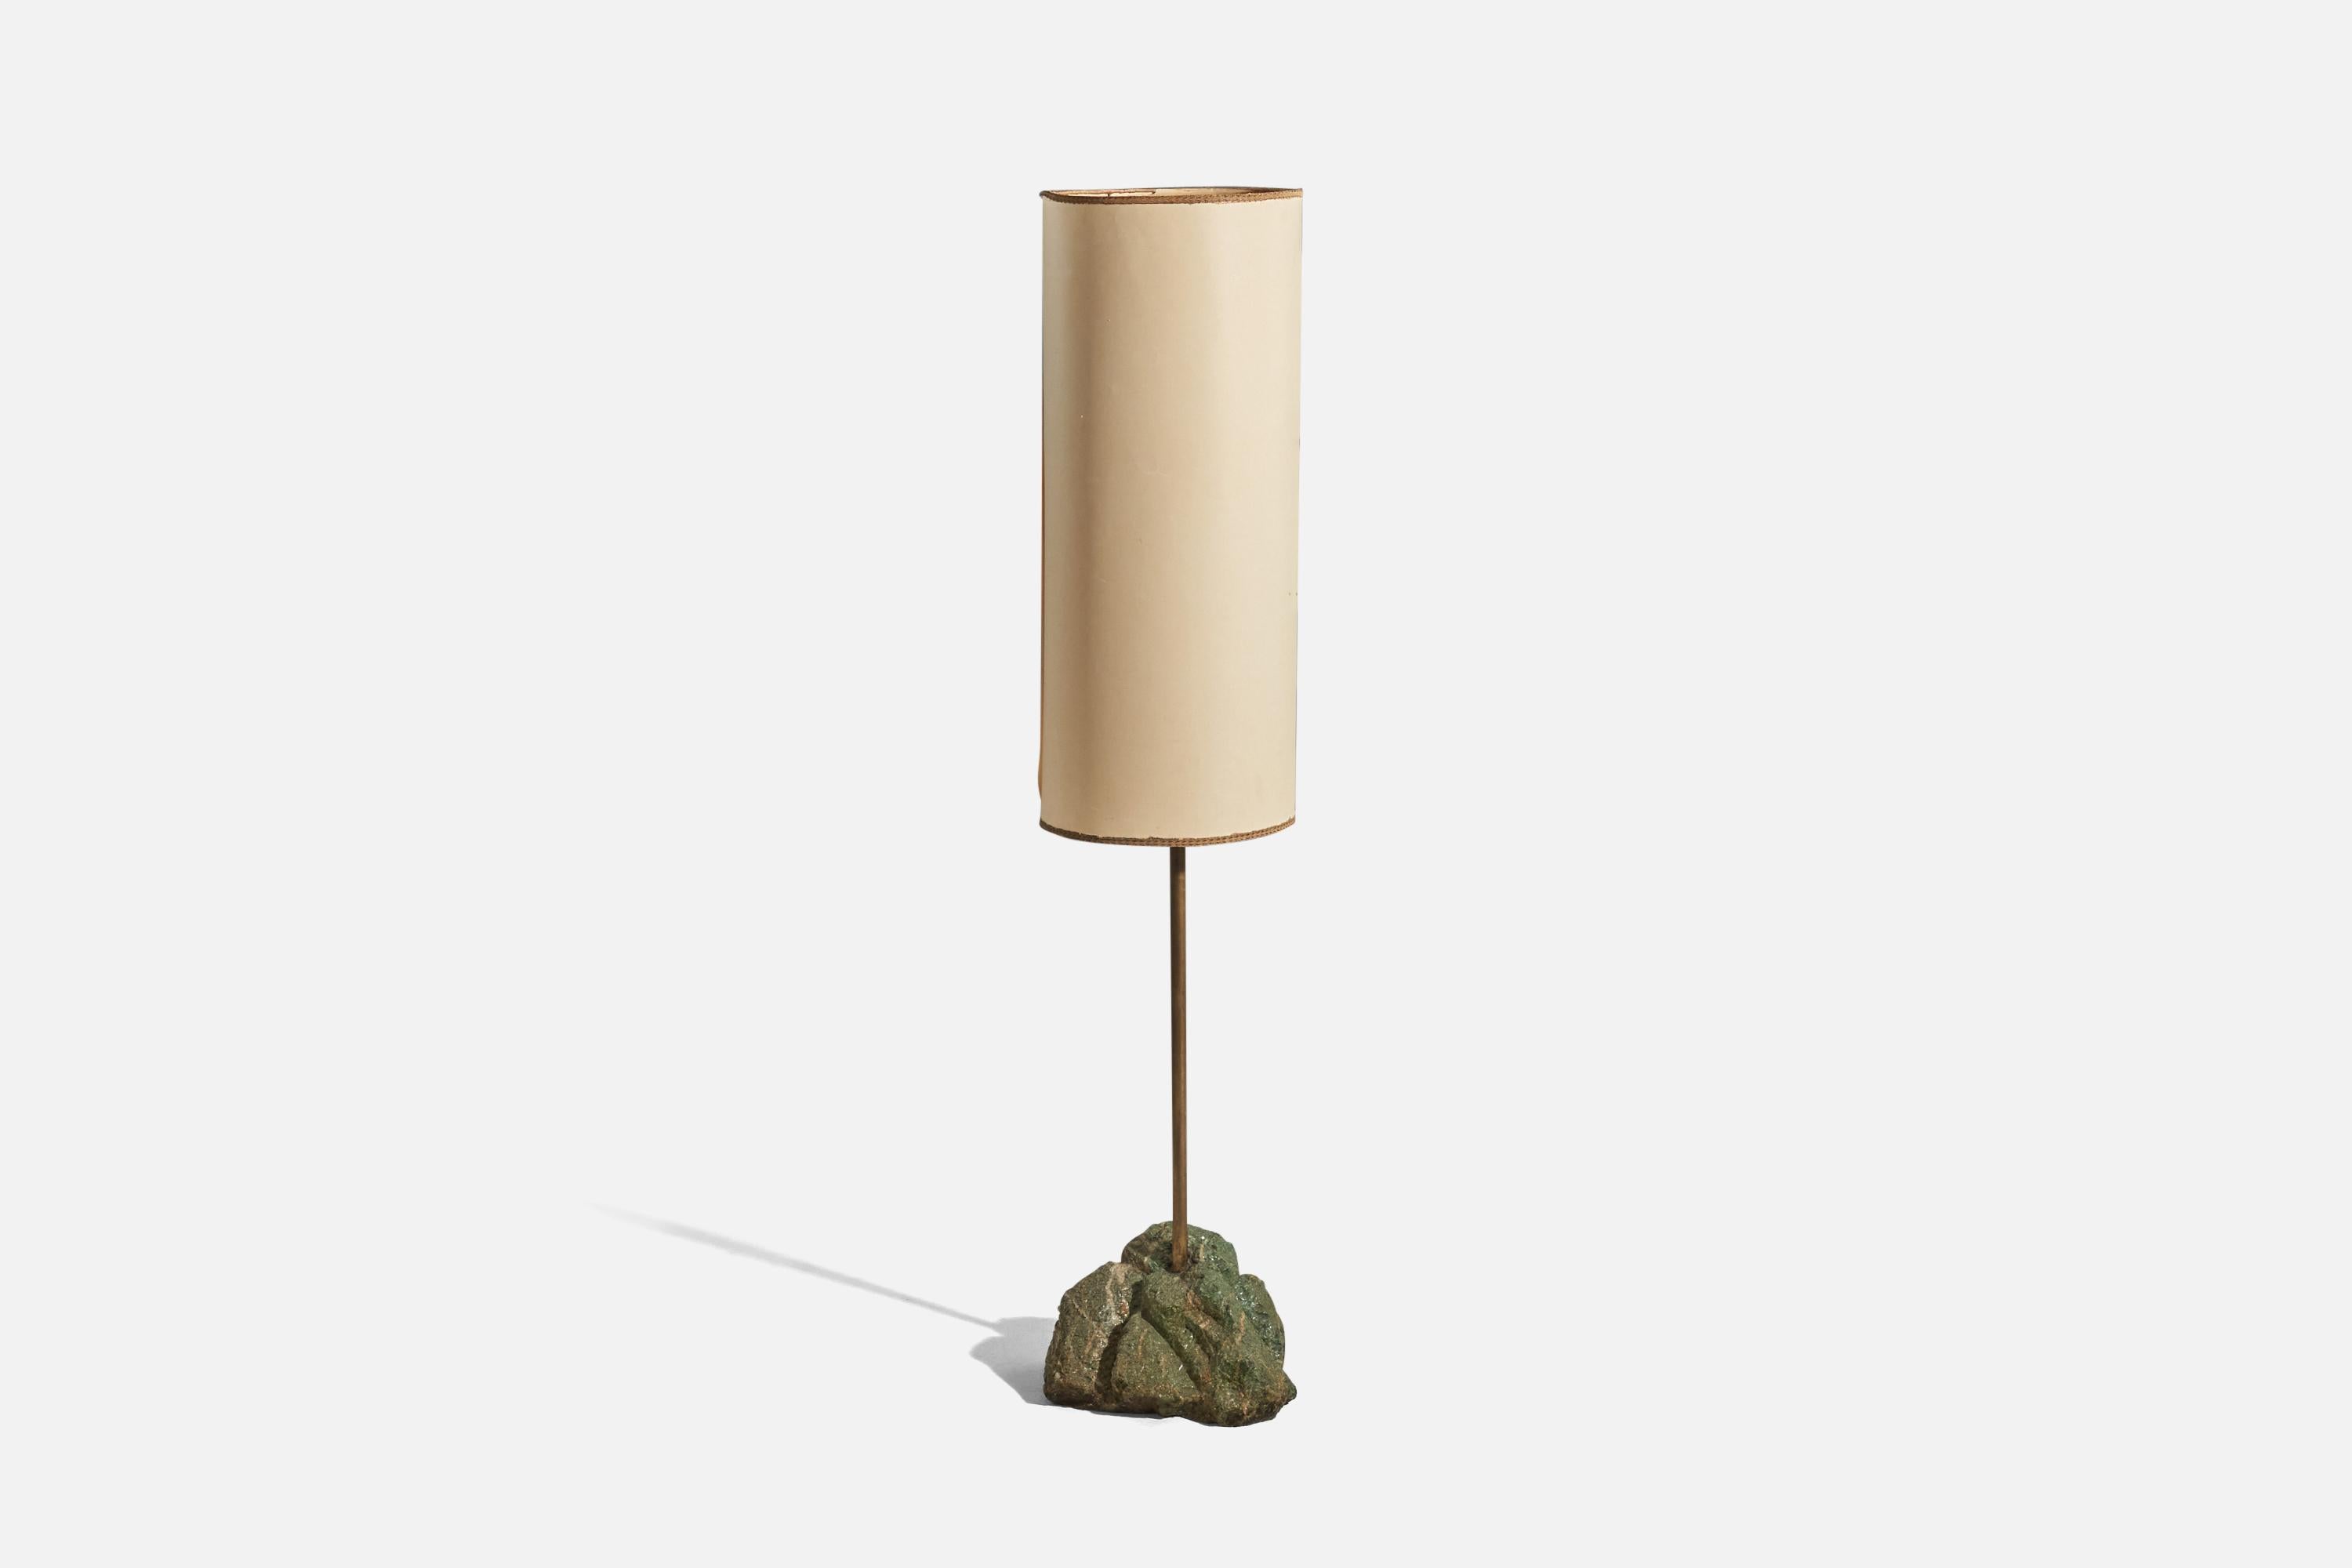 A stone, brass and paper floor lamp designed and produced in Italy, c. 1950s.

Sold with Lampshade. 
Stated dimensions refer to the Floor Lamp with the Shade.

Socket takes standard E-26 medium base bulb.
There is no maximum wattage stated on